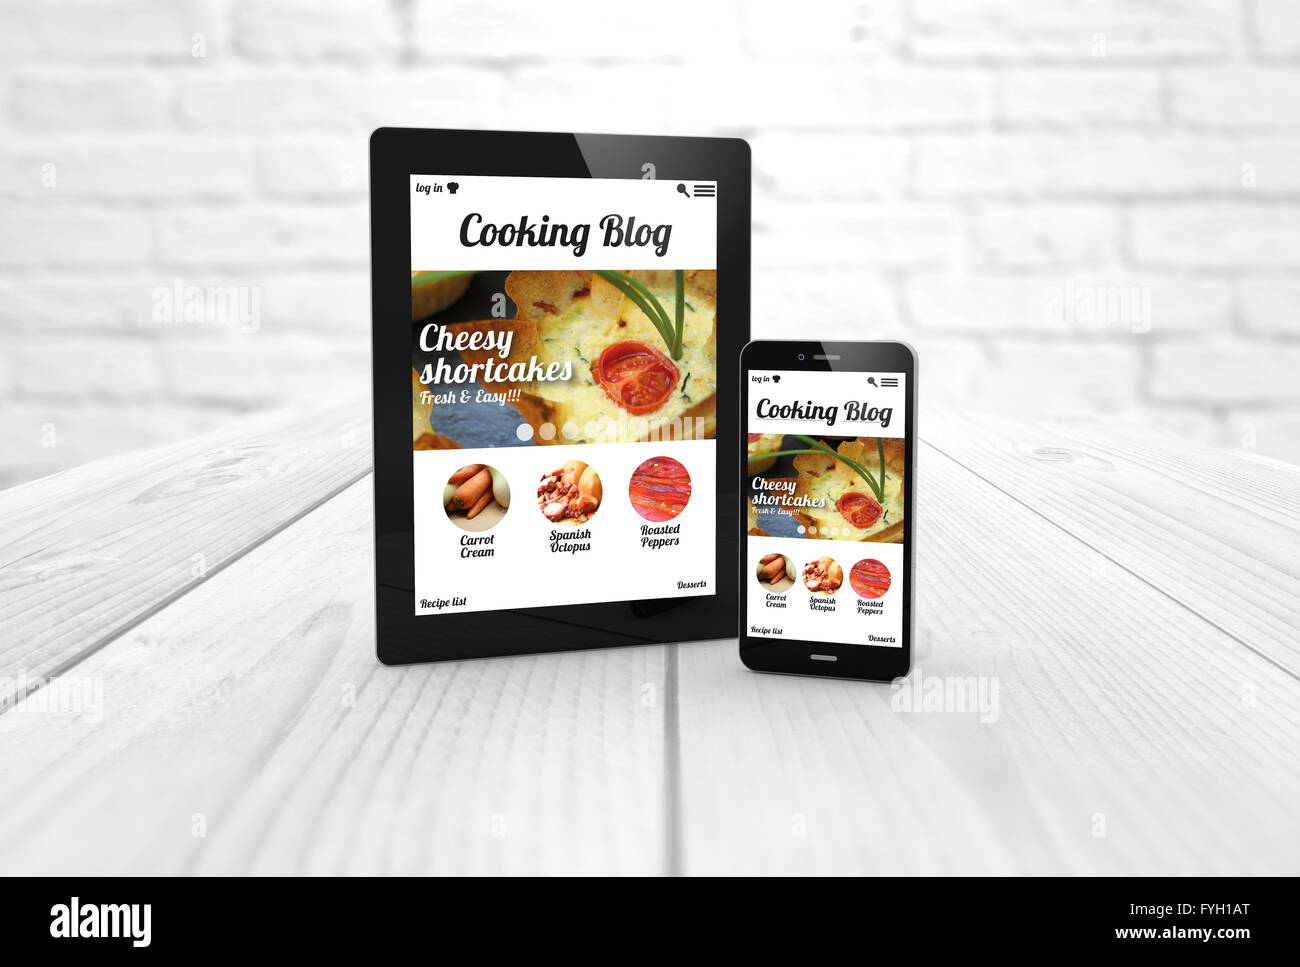 tablet pc computer and mobile smartphone with cooking blog on the screen. All screen graphics are made up. Stock Photo